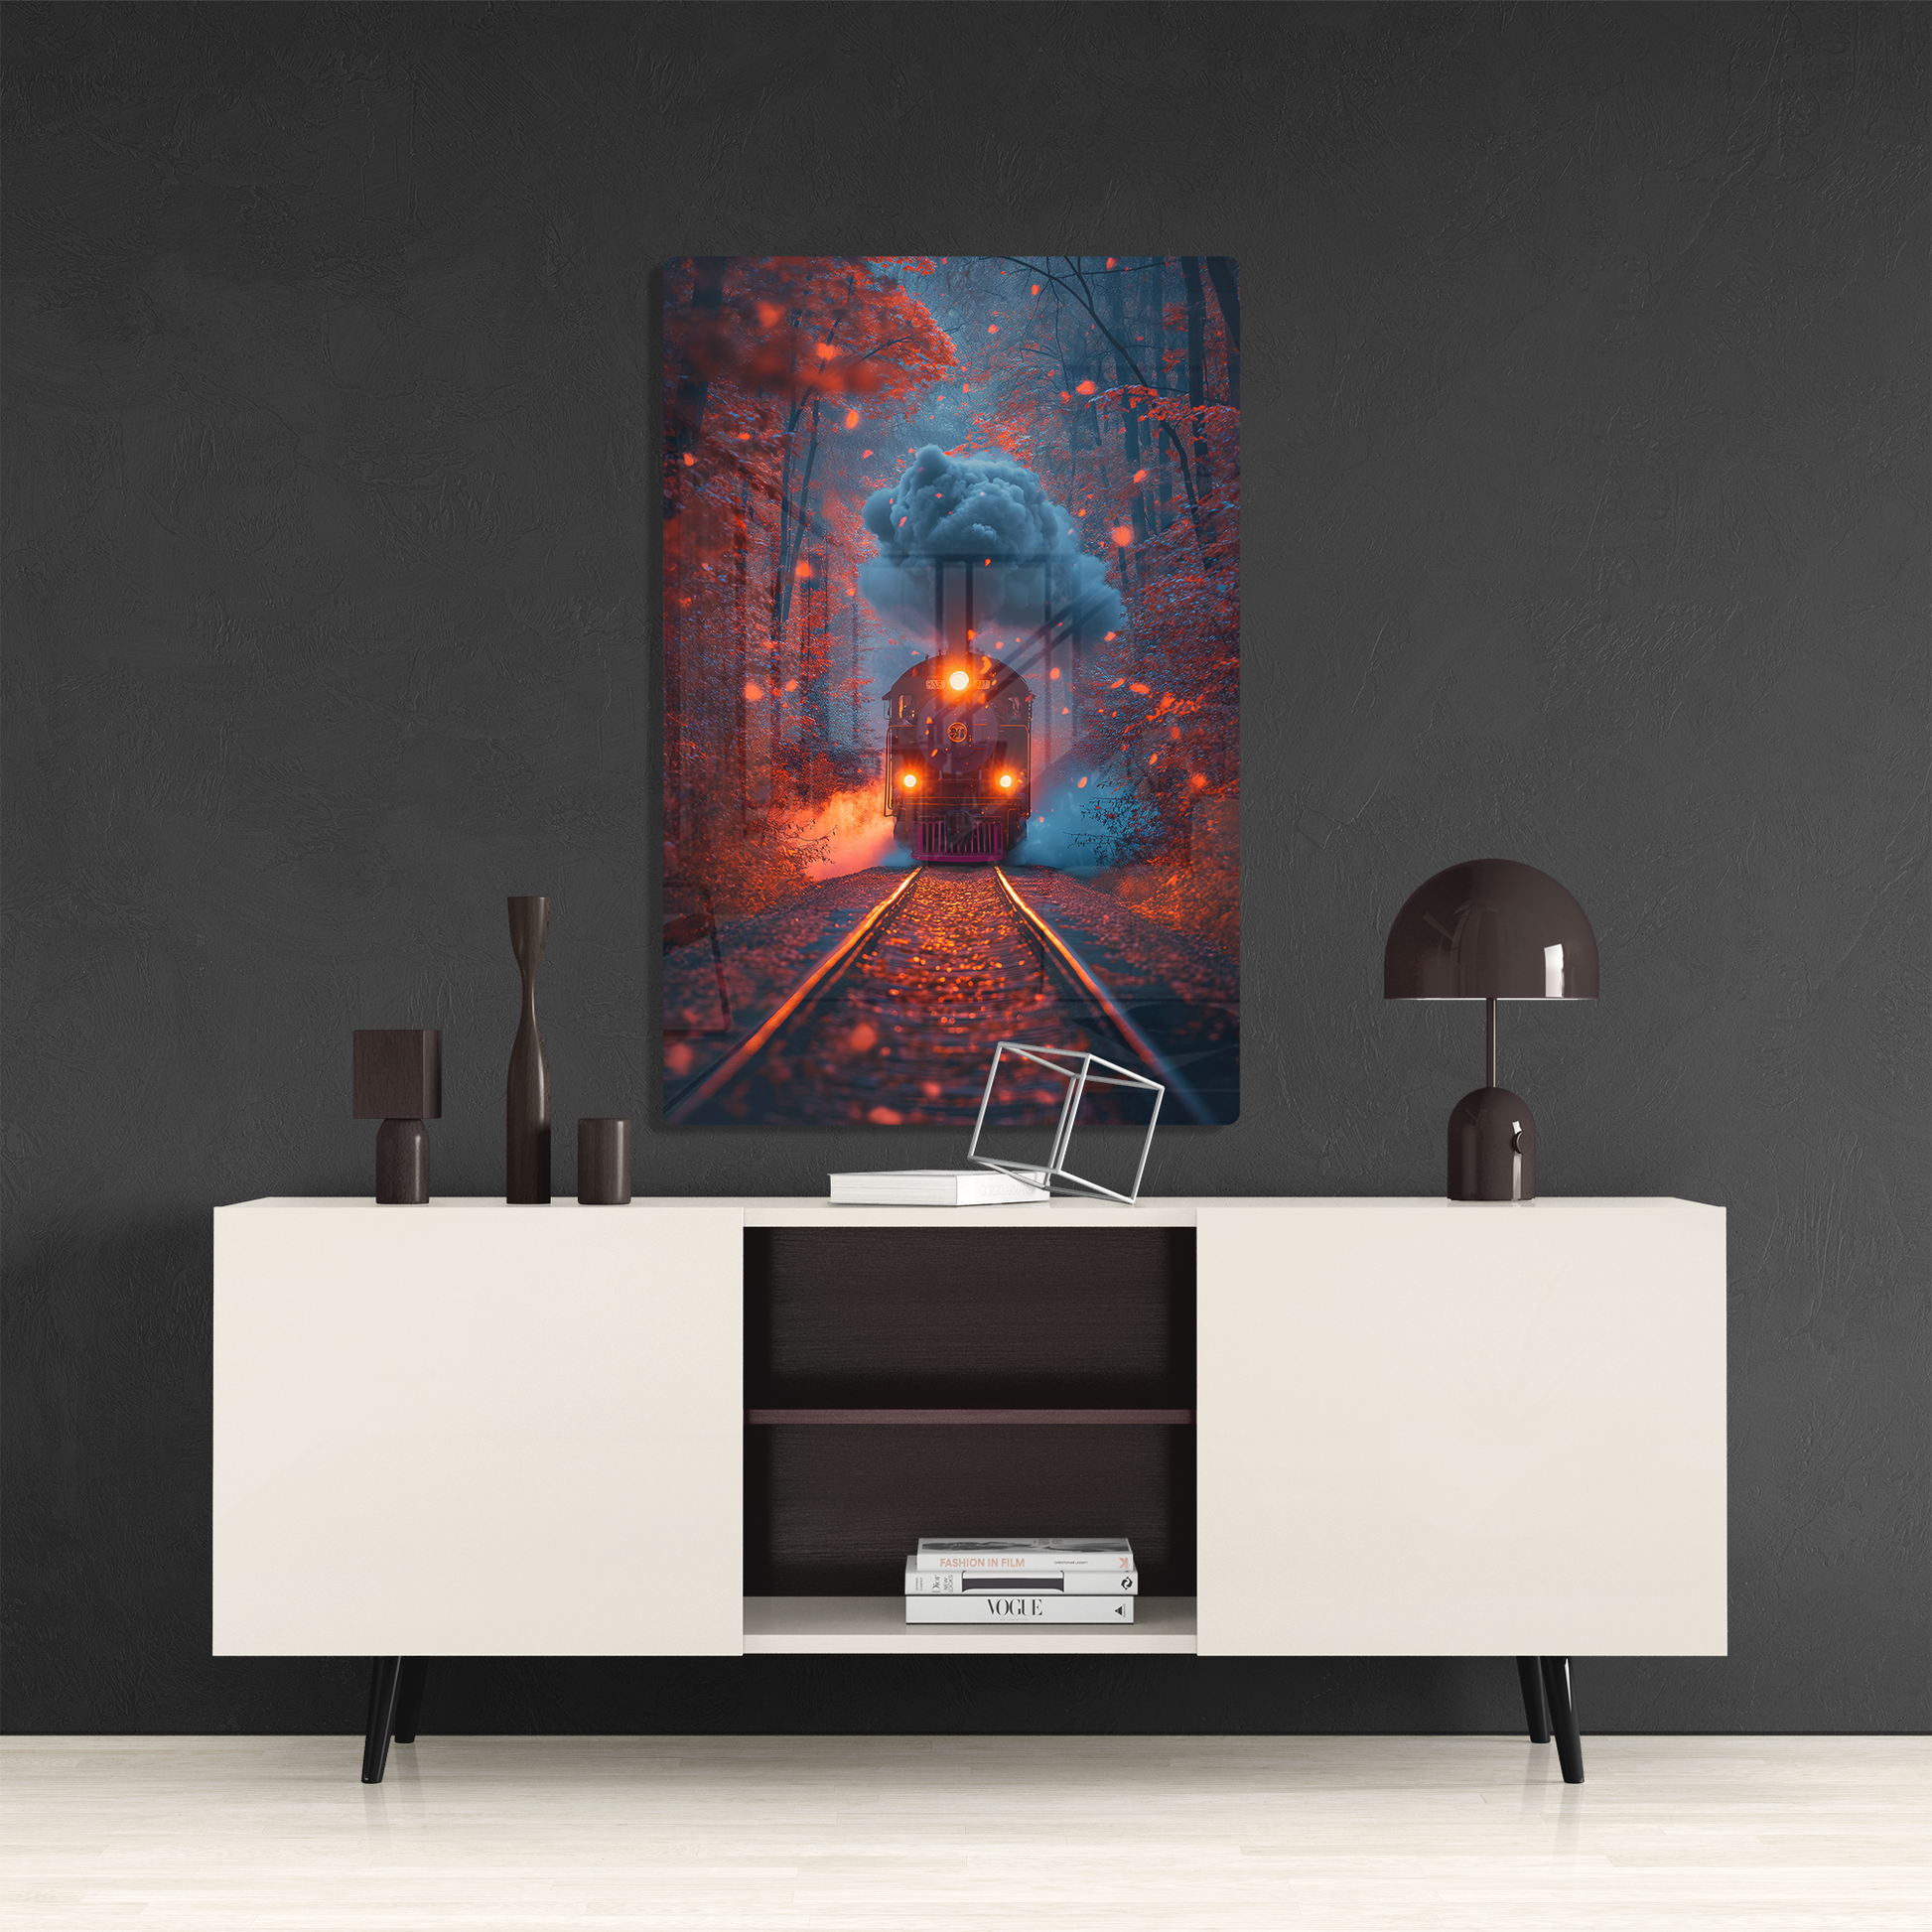 Autumn Journey (Acrylic)Make a statement with Autumn Journey acrylic prints. The 1⁄4" acrylic panel exudes the illusion of a smooth glass surface for vibrant artwork. Pre-installed hanging RimaGallery